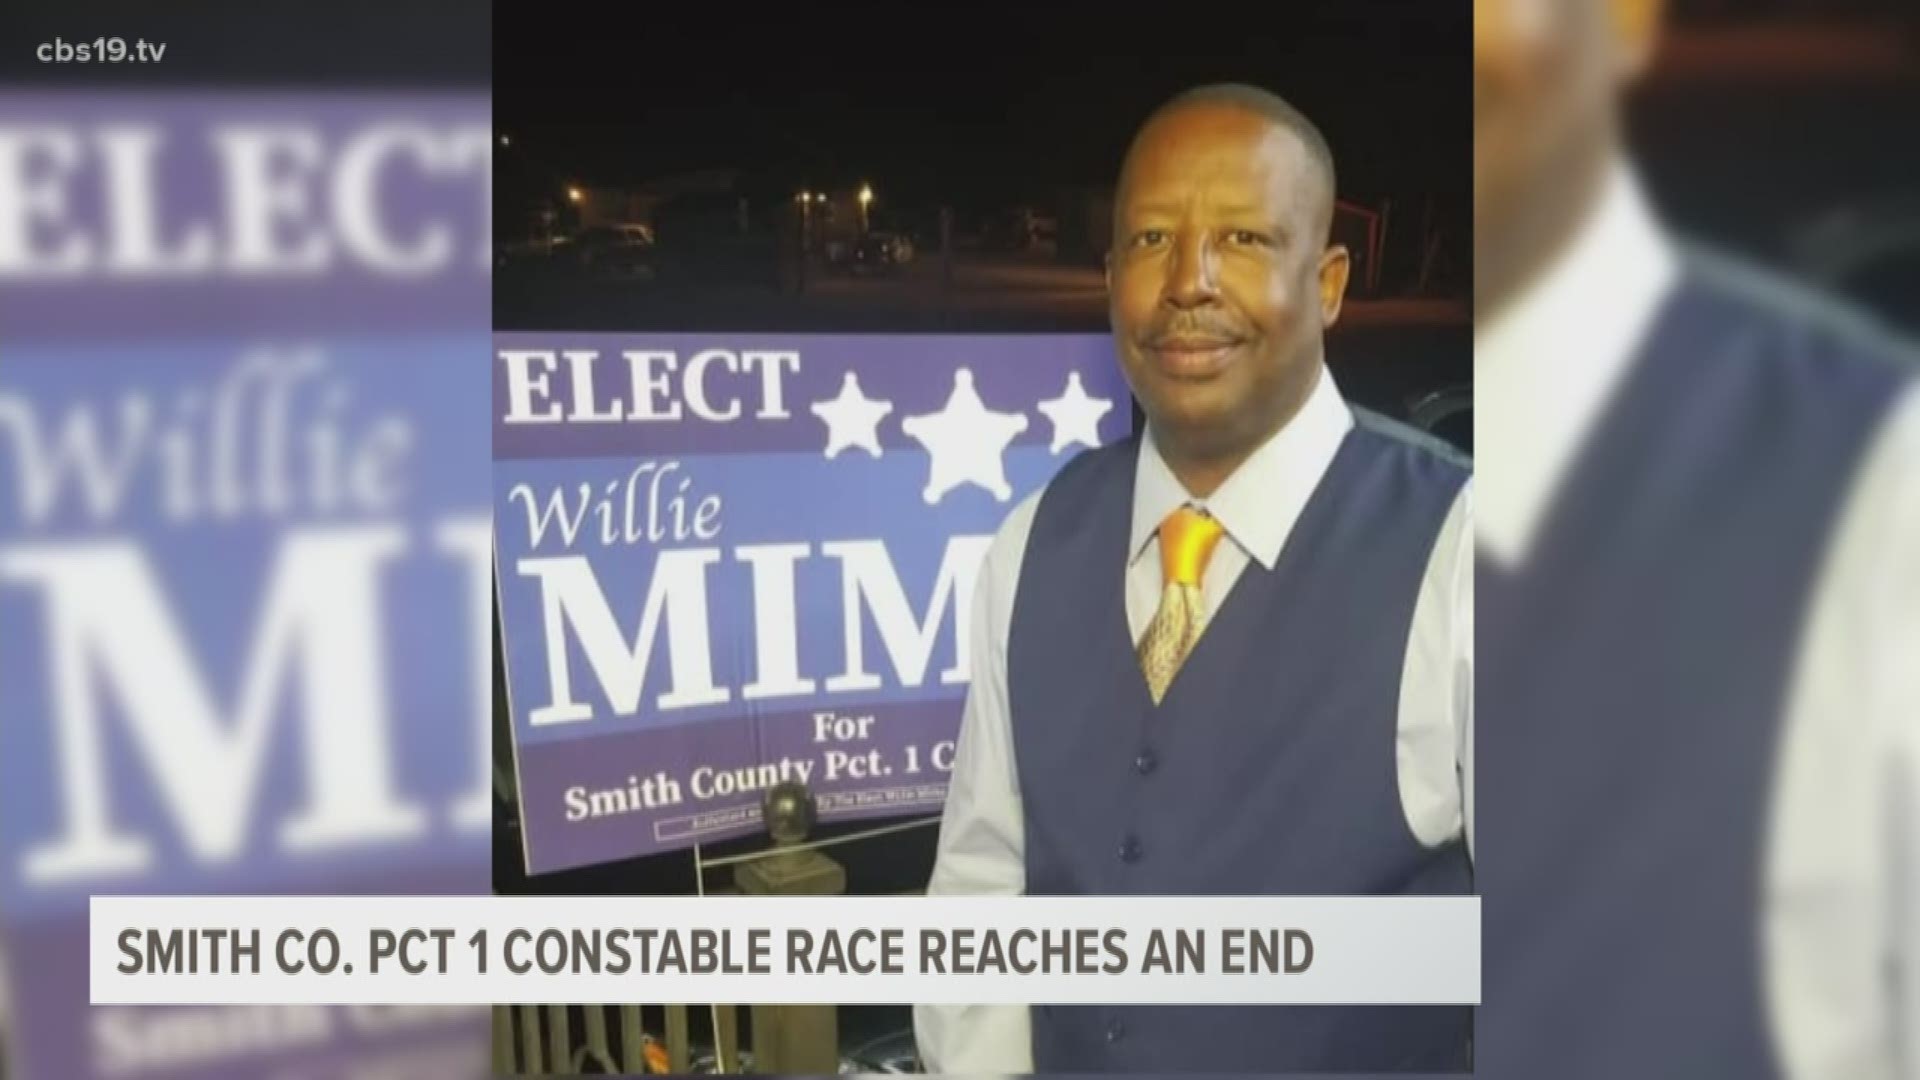 A judge ruled in favor of Willie Mims that will secure his Feb. victory for constable.